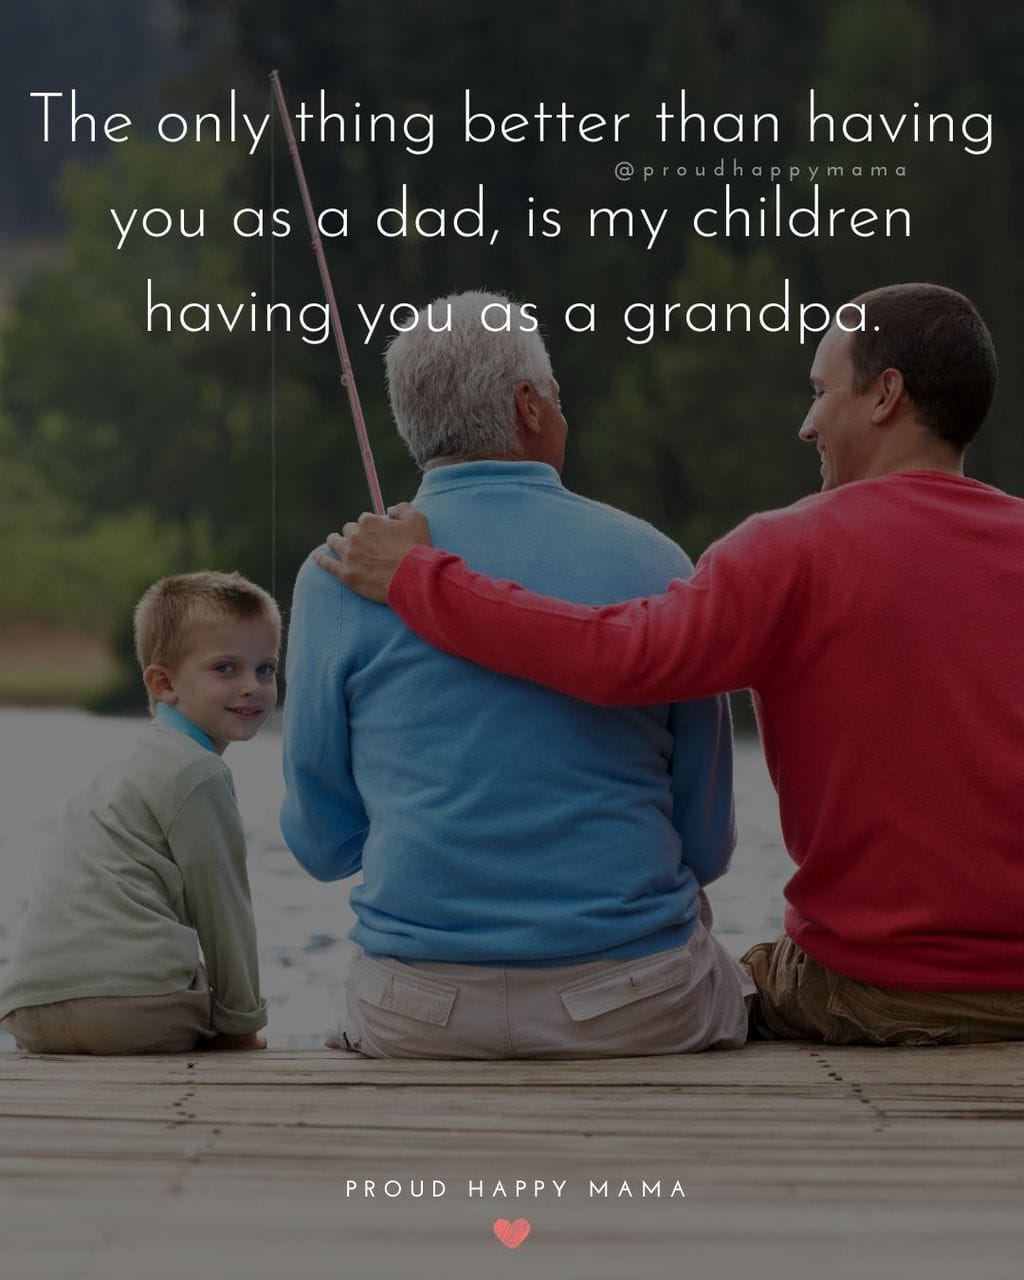 40 Grandpa Quotes (With Images)